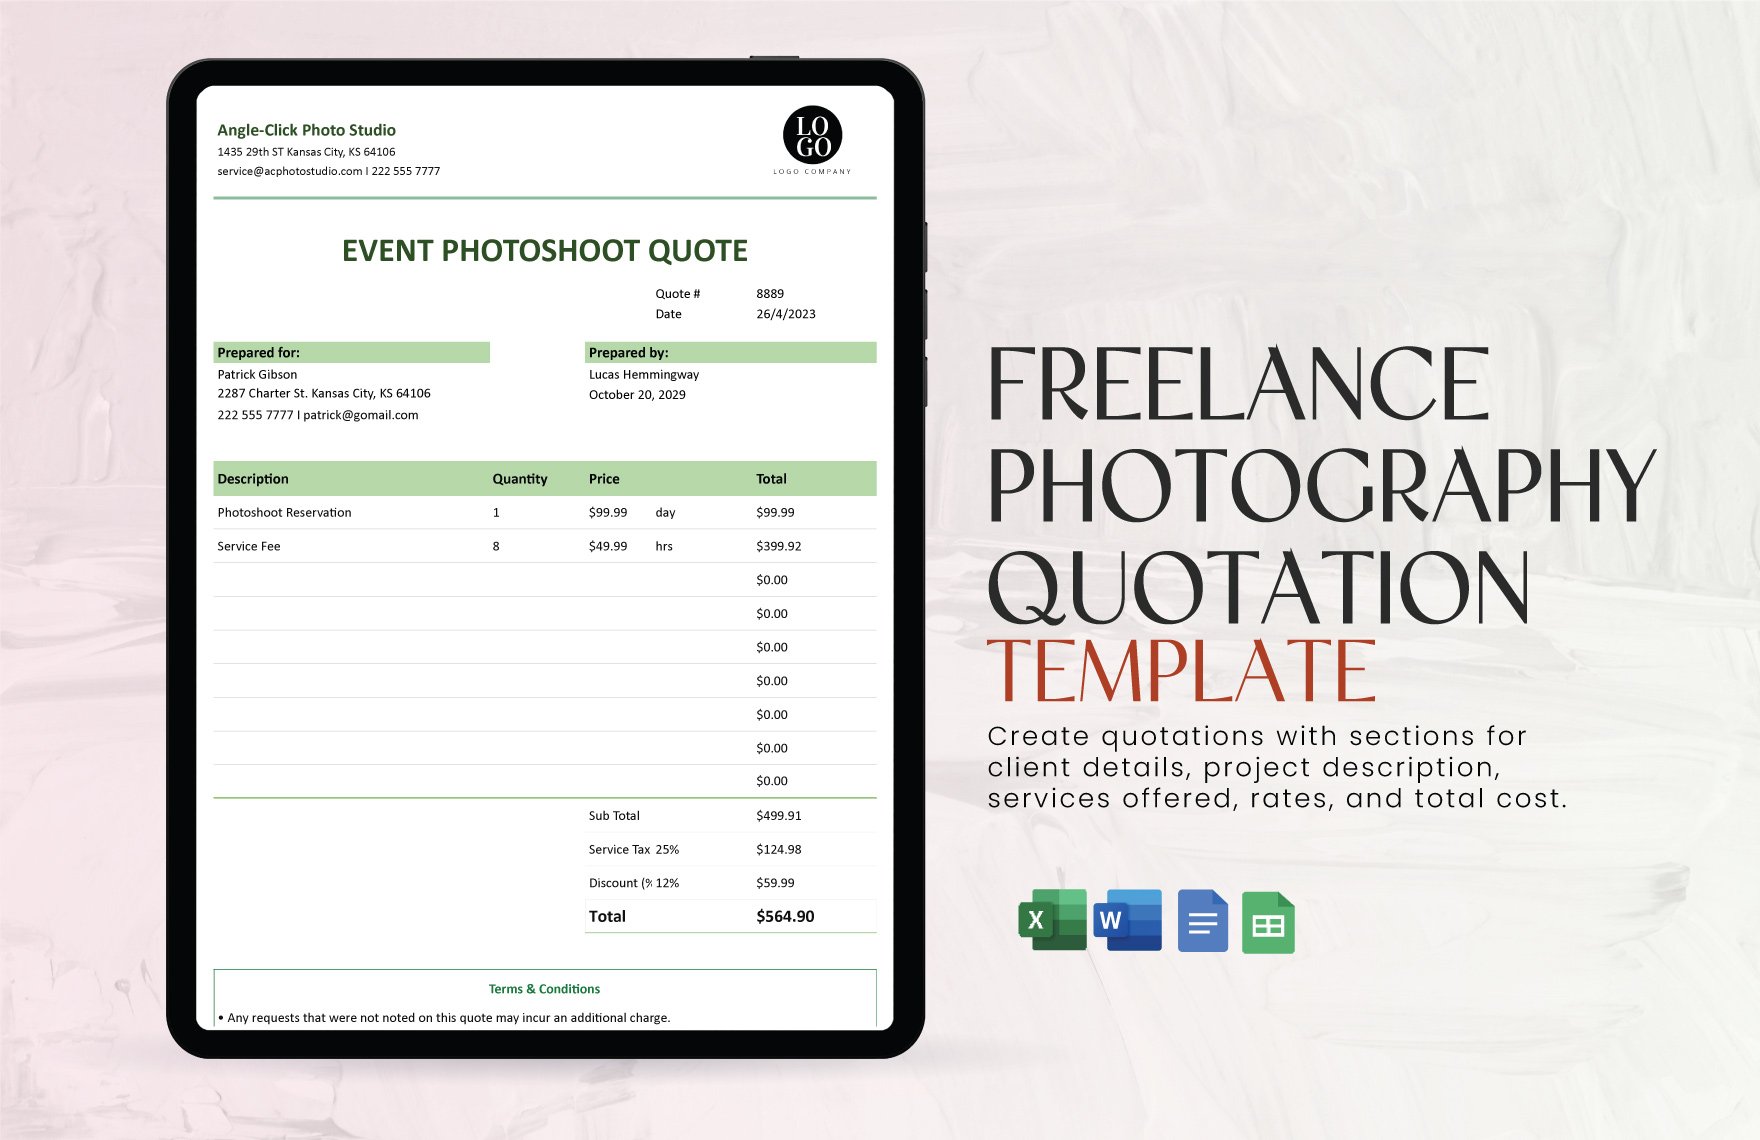 Freelance Photography Quotation Template in Word, Google Docs, Excel, Google Sheets